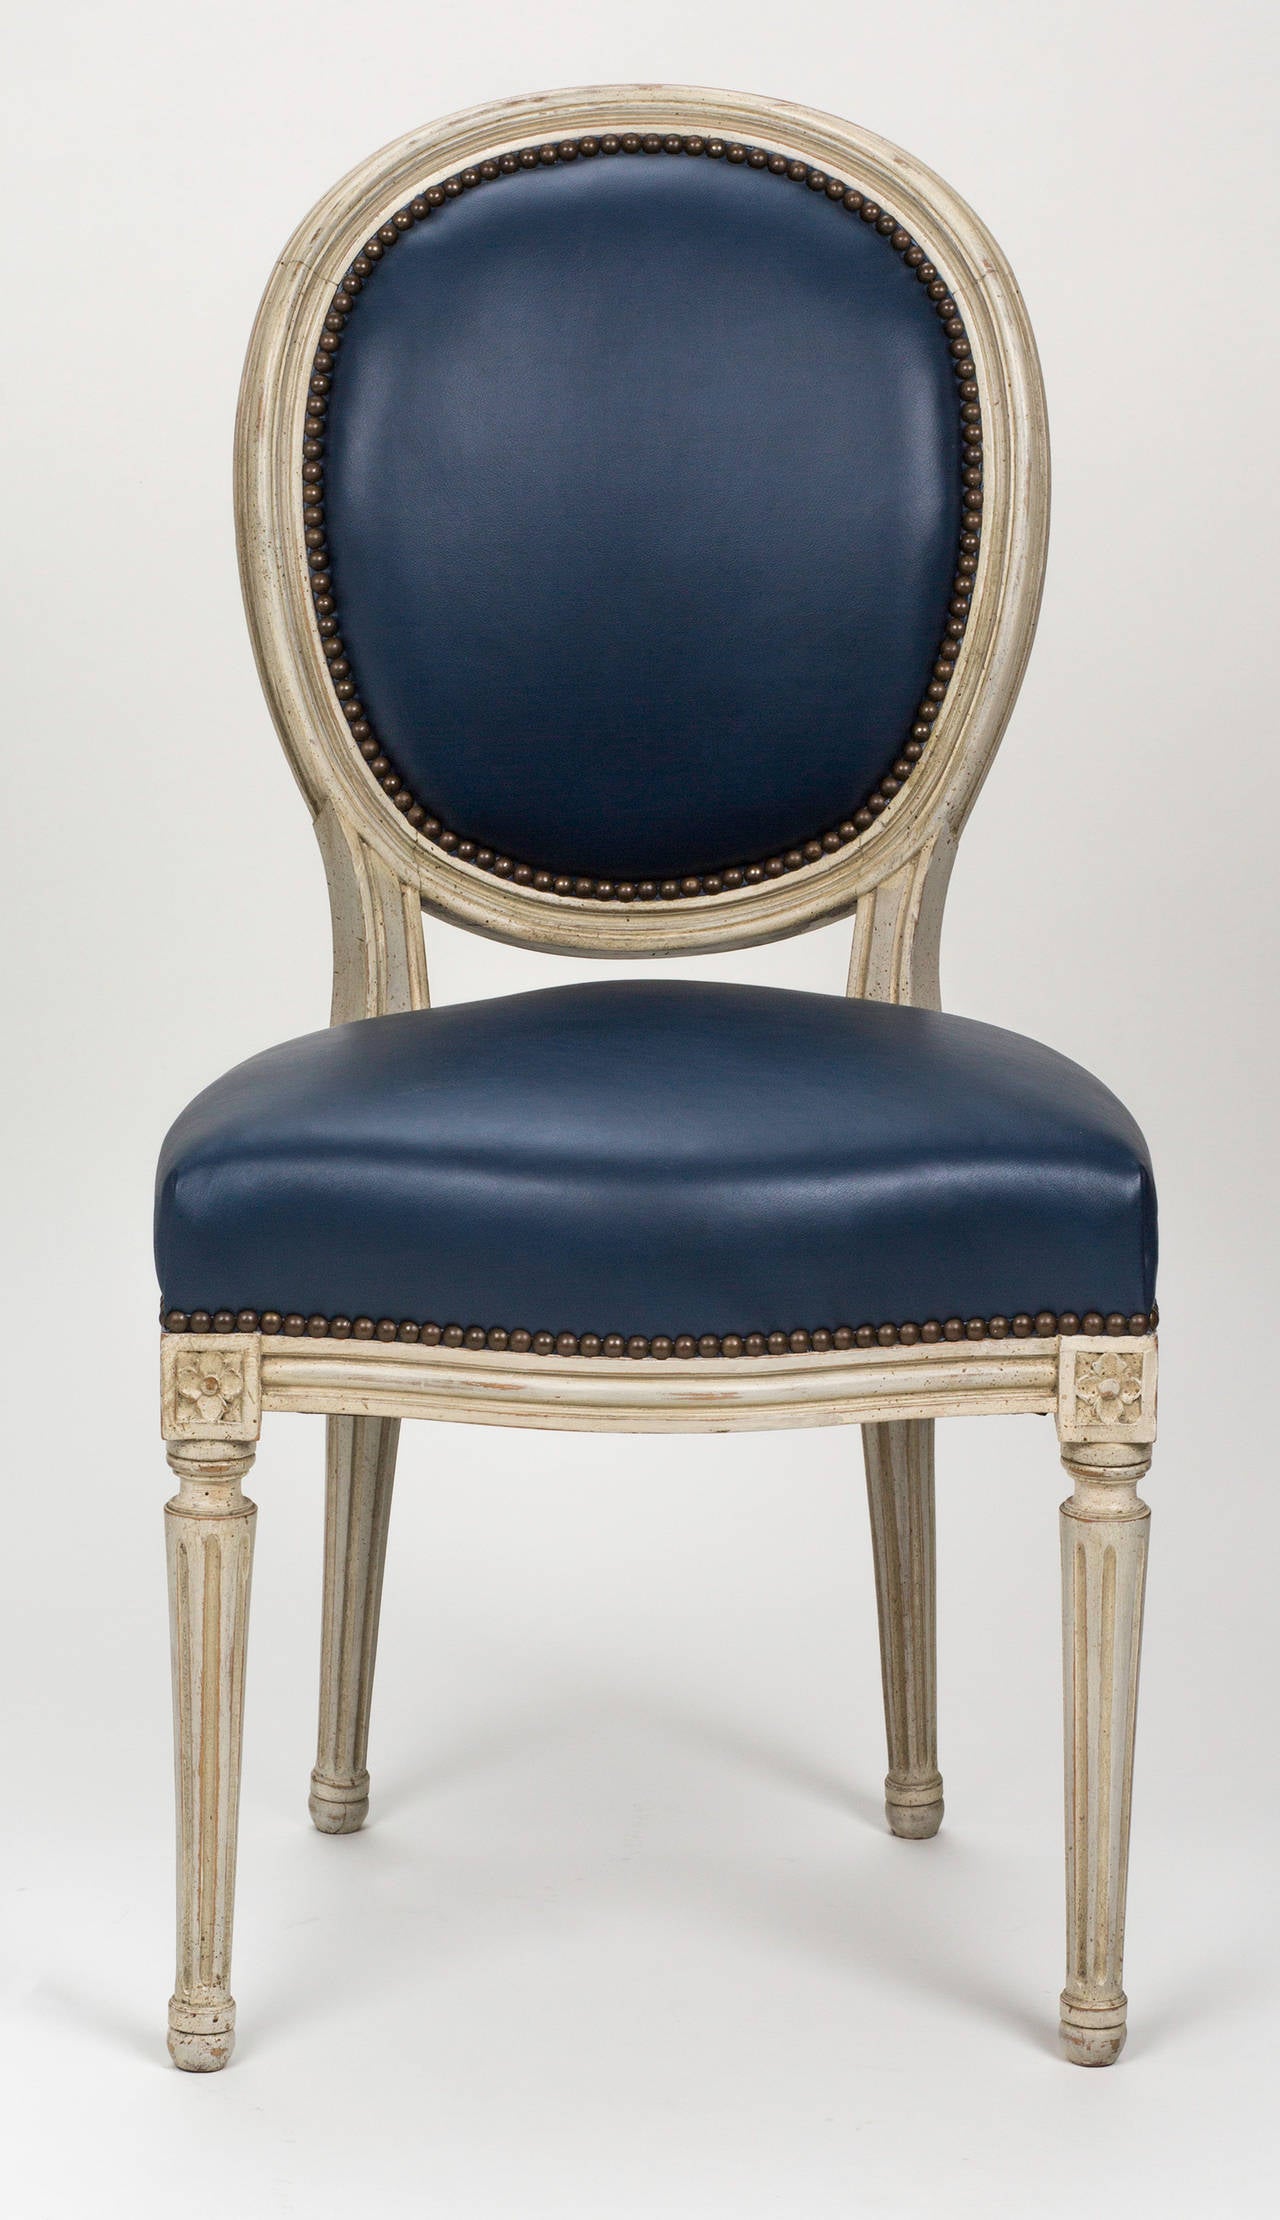 Pair of 1880s French Louis XVI style chairs. Lovely antique painted finish, newly upholstered in Edelman's leather. Finished in antique brass nail studs.